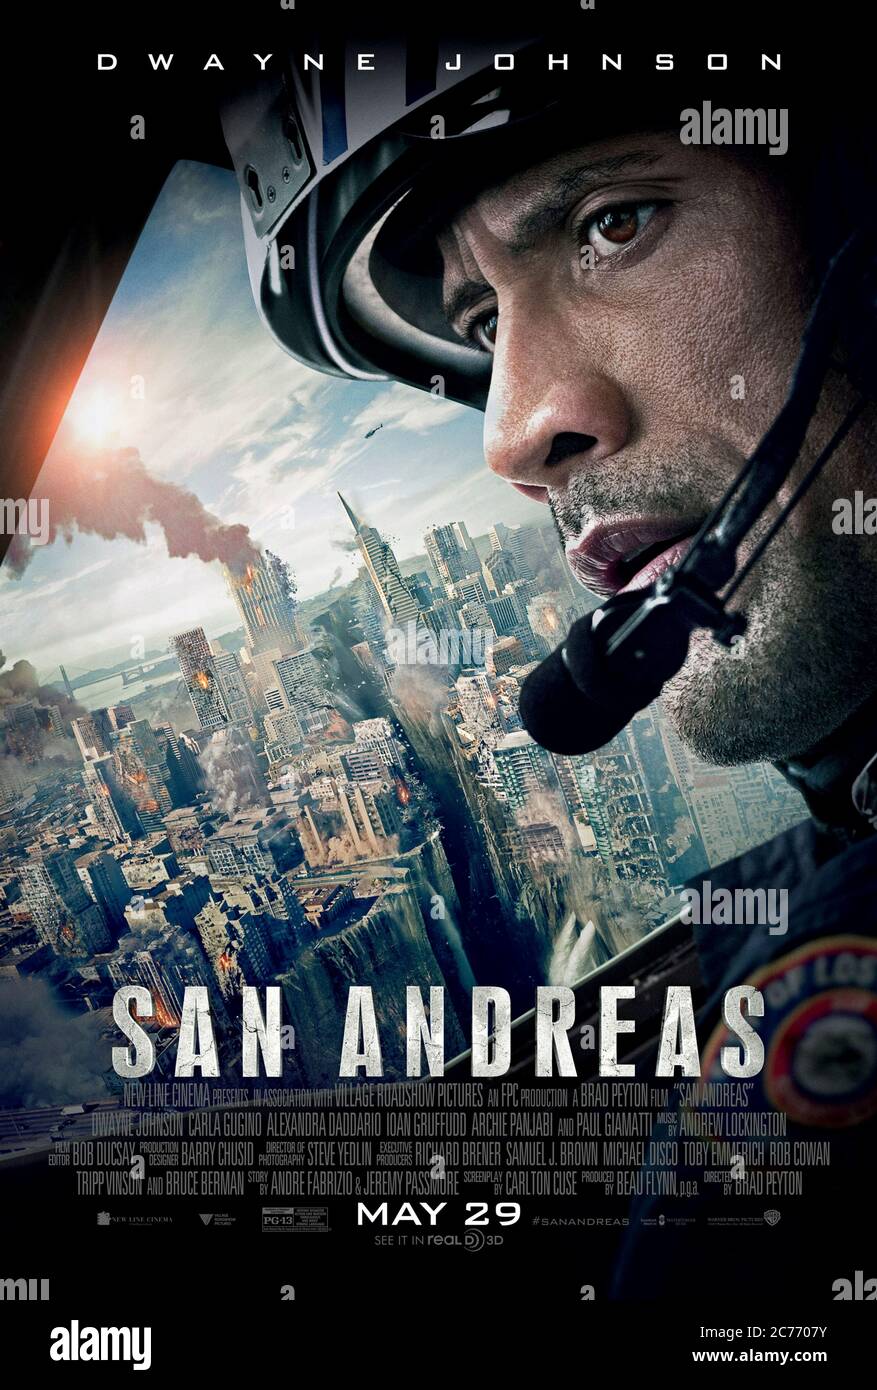 San Andreas (2015) directed by Brad Peyton and starring Dwayne Johnson, Carla Gugino, Alexandra Daddario and Paul Giamatti. The big one hits California and a helicopter rescue pilot tries to find his daughter with his estranged wife. Stock Photo